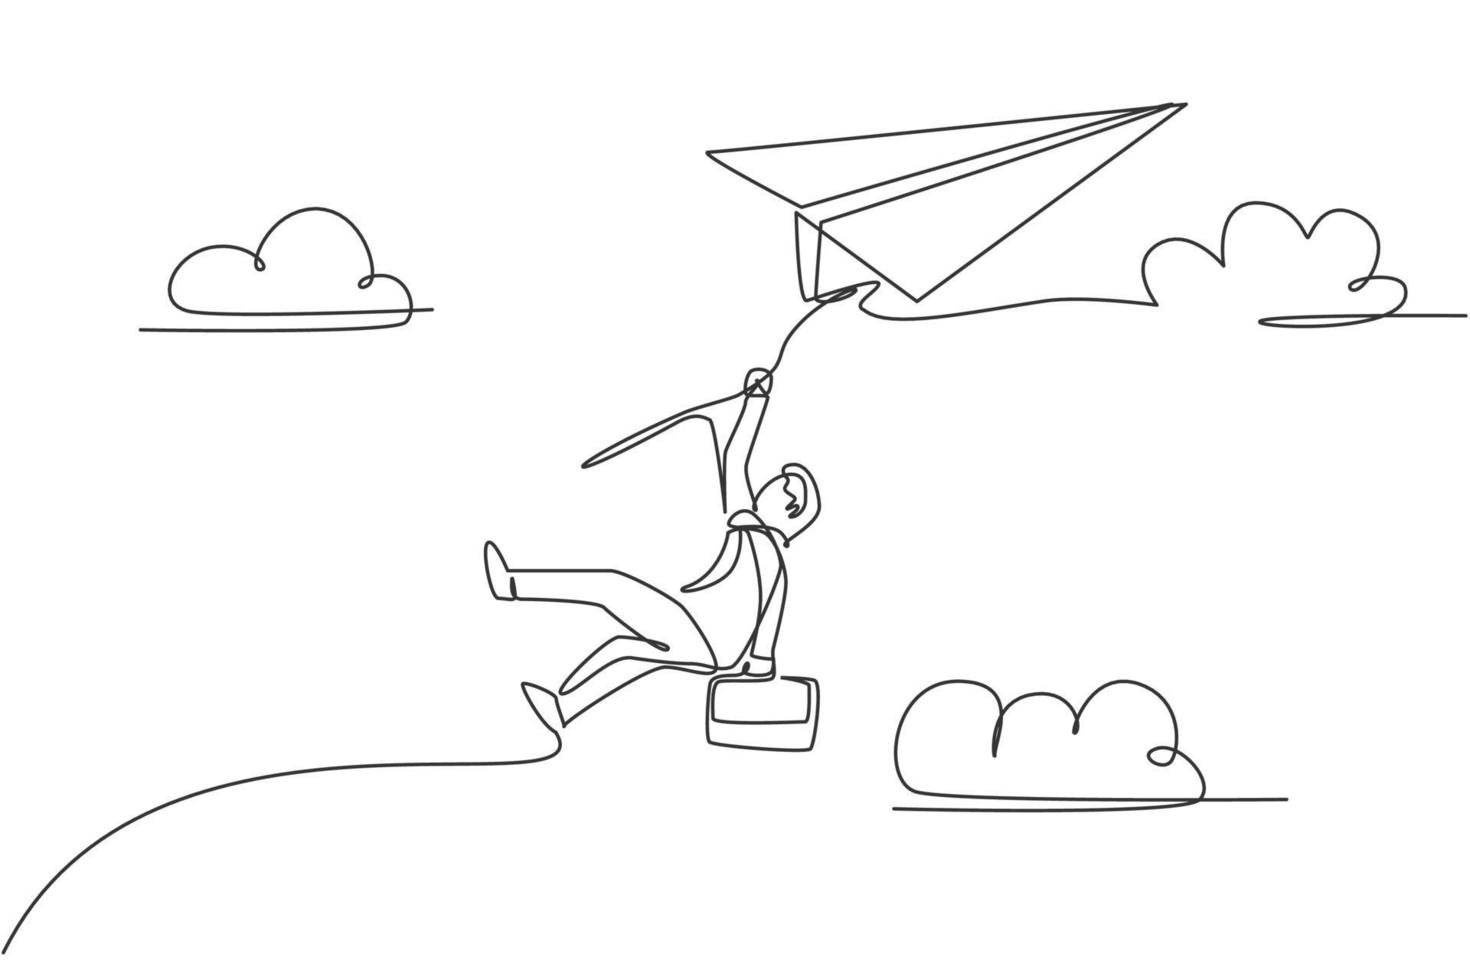 Continuous one line drawing of young male worker hanging tight on flying paper aircraft. Business challenge, metaphor concept. Minimalist trendy single line draw design vector graphic illustration